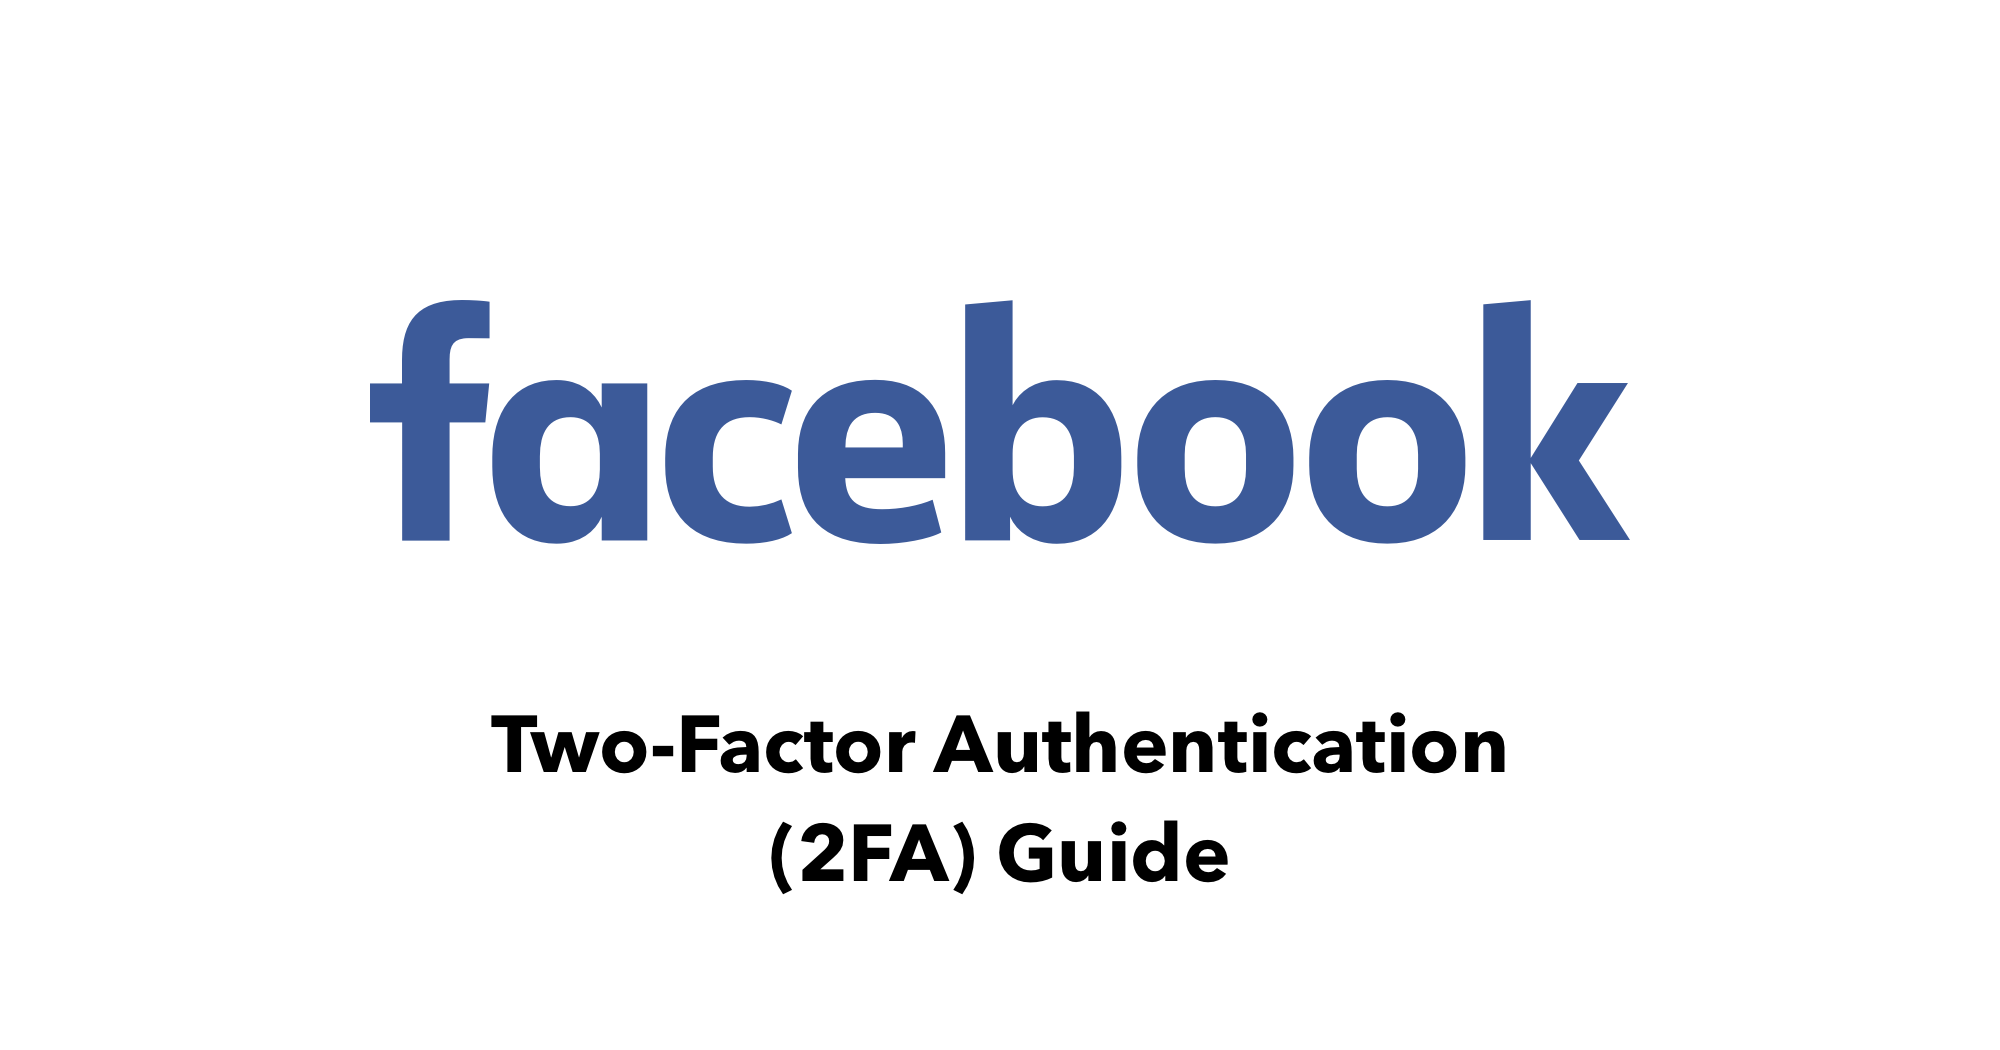 How to turn on two-factor authentication (2FA) on Facebook